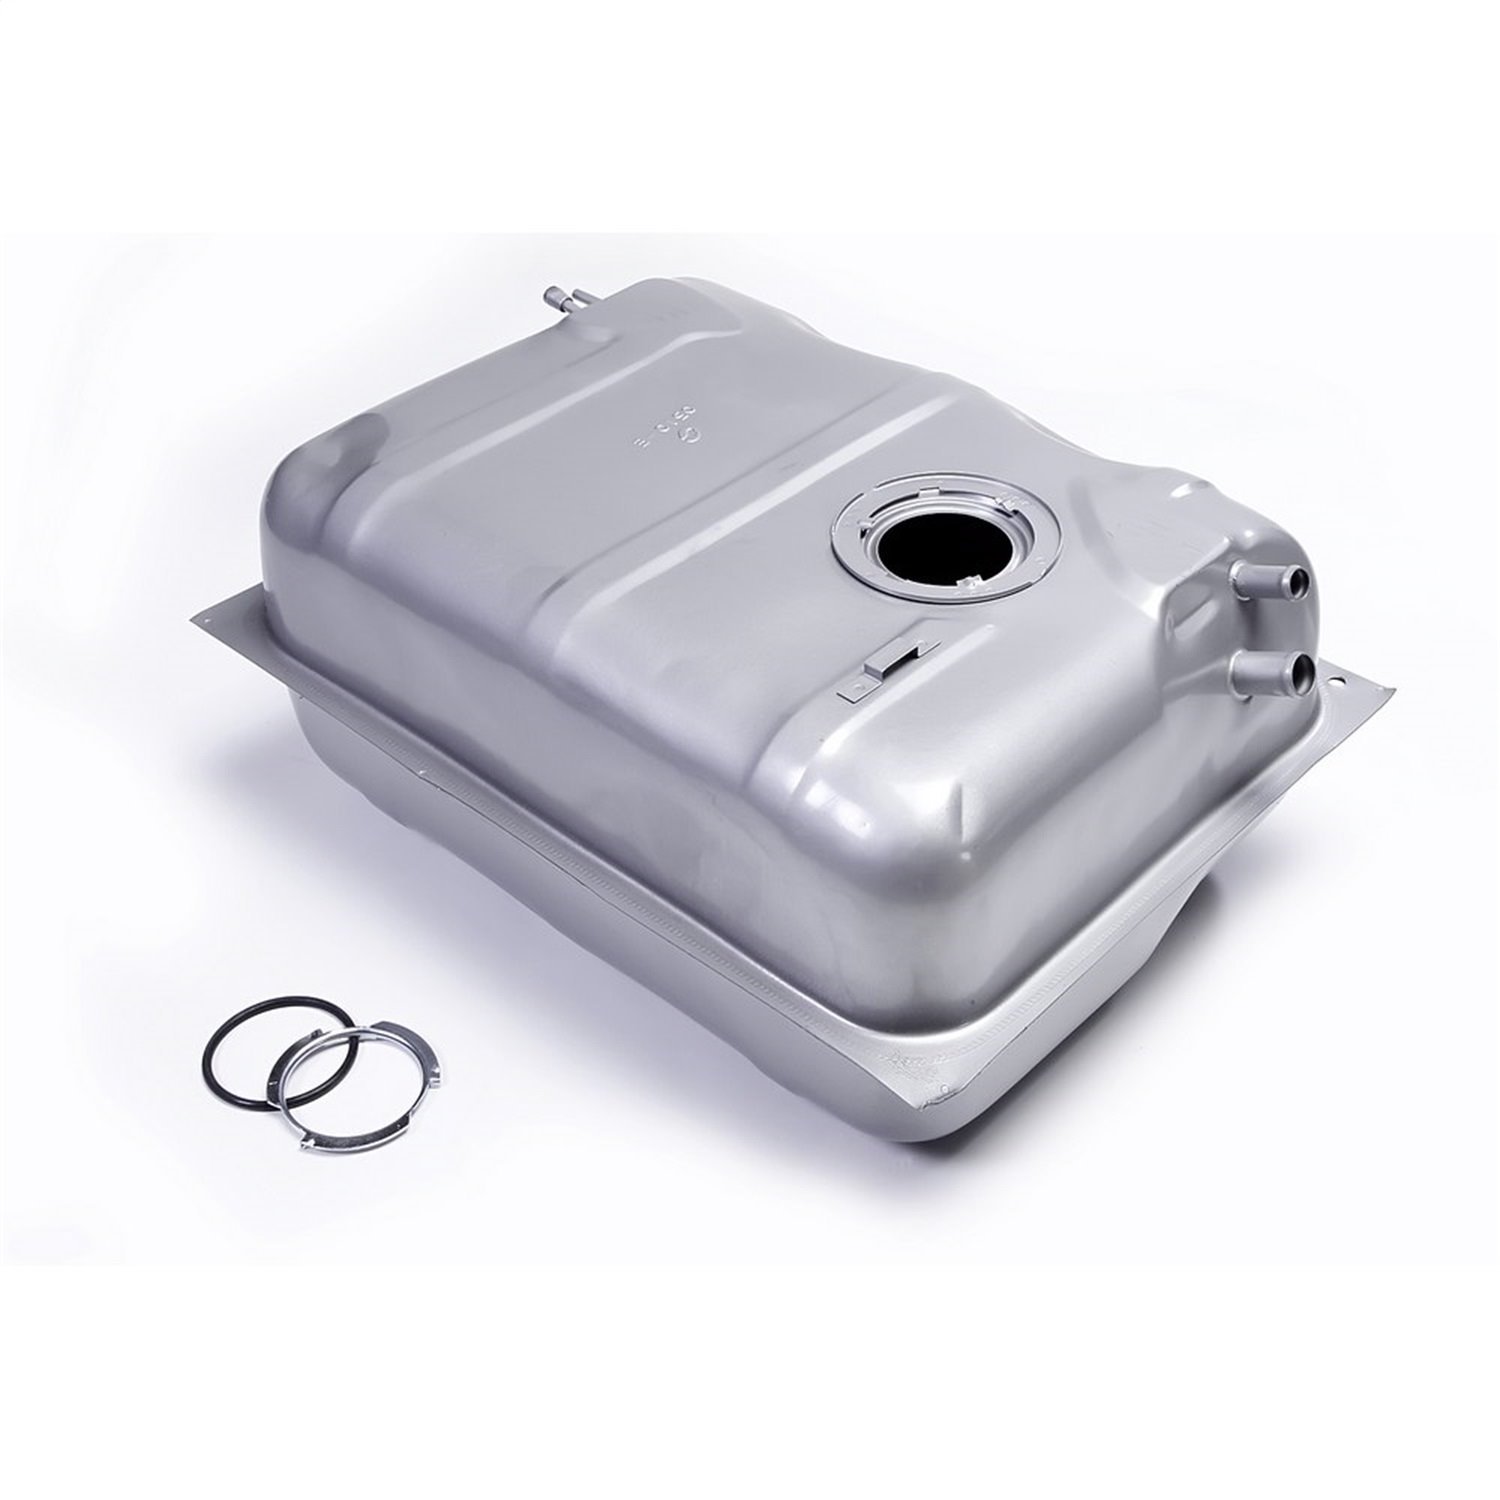 This 15 gallon gas/fuel tank by Omix-ADA fits